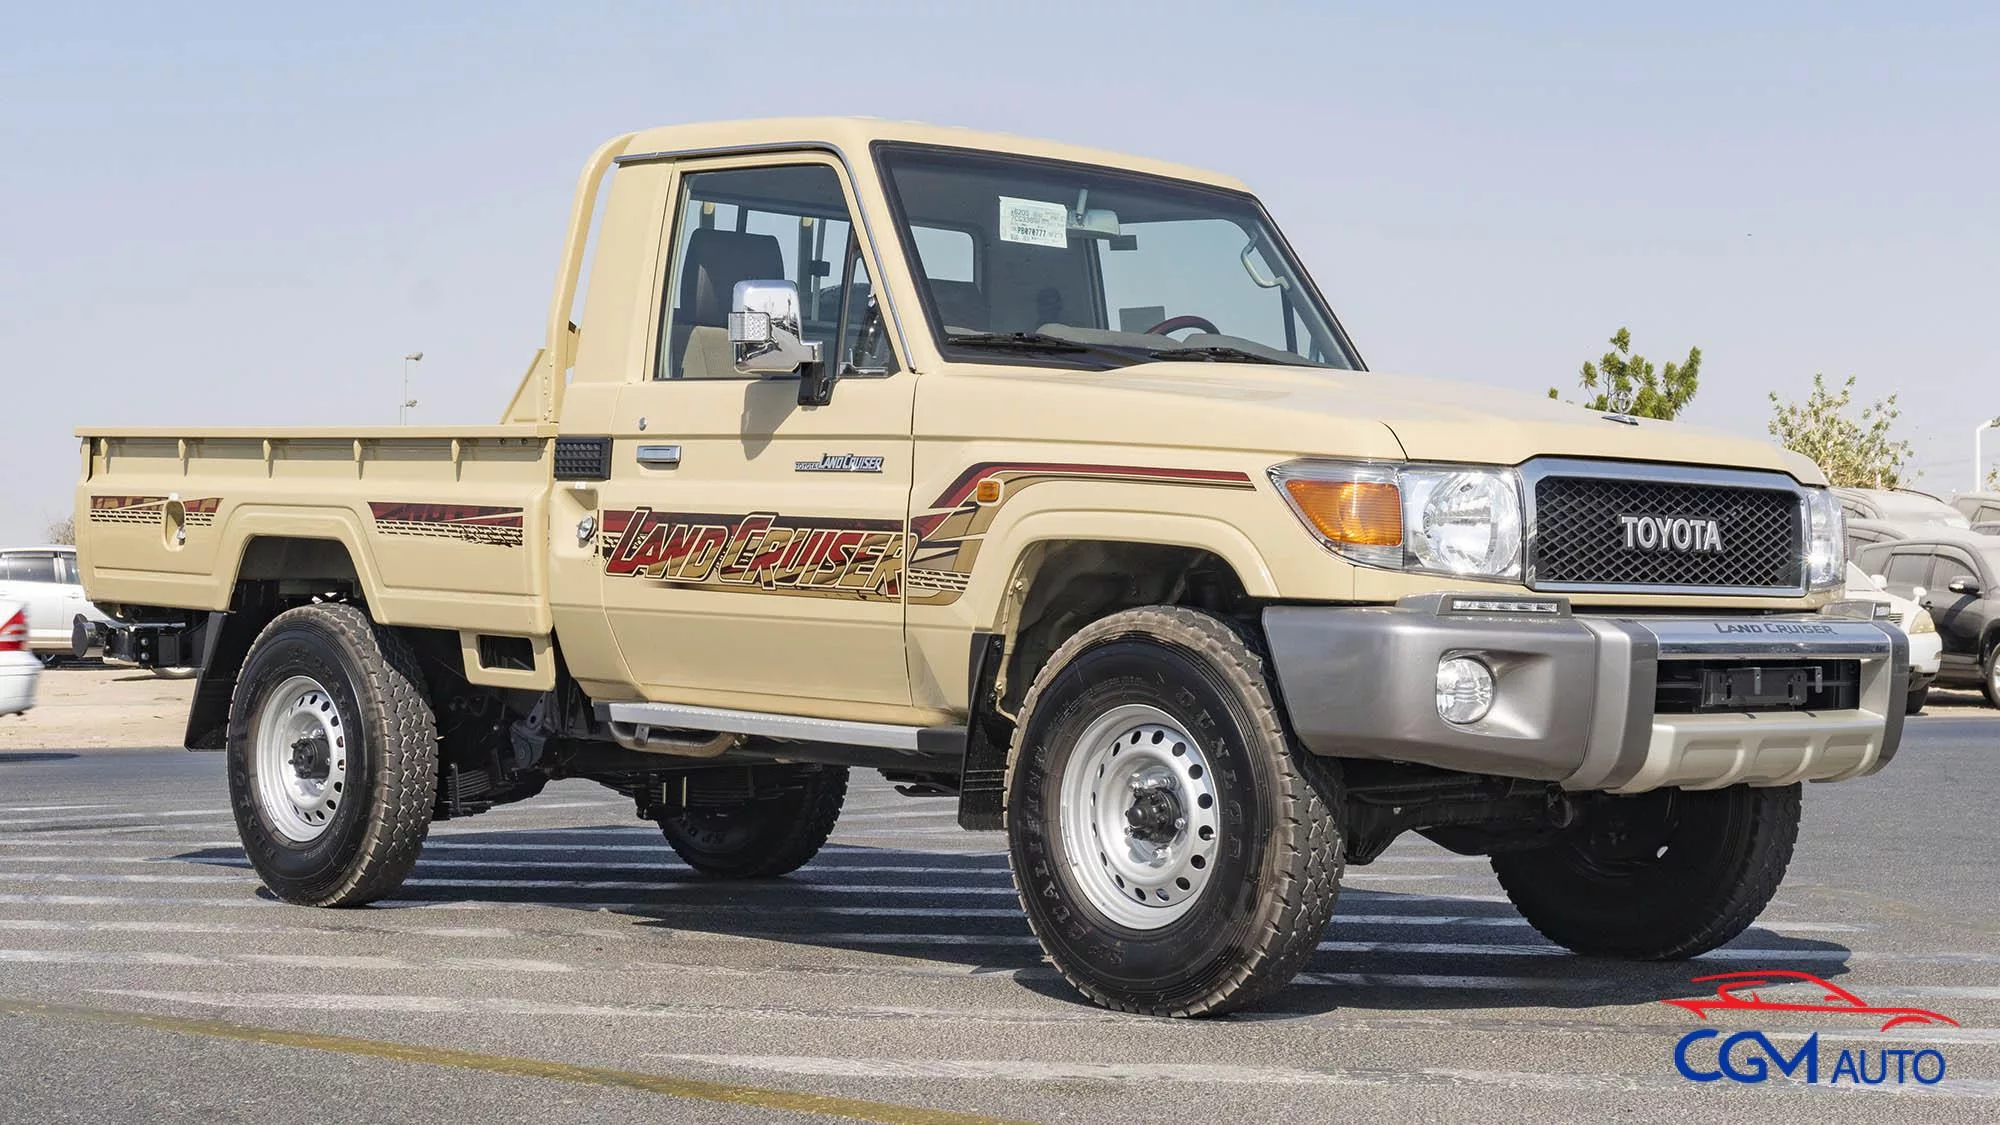 2023 Toyota Land Cruiser 79 Single Cabin 4.0 Petrol new cars selling 2023 2024 | Explore Exciting New Car Deals for Sale in UAE, Dubai, Sharjah, and Abu Dhabi | Offers